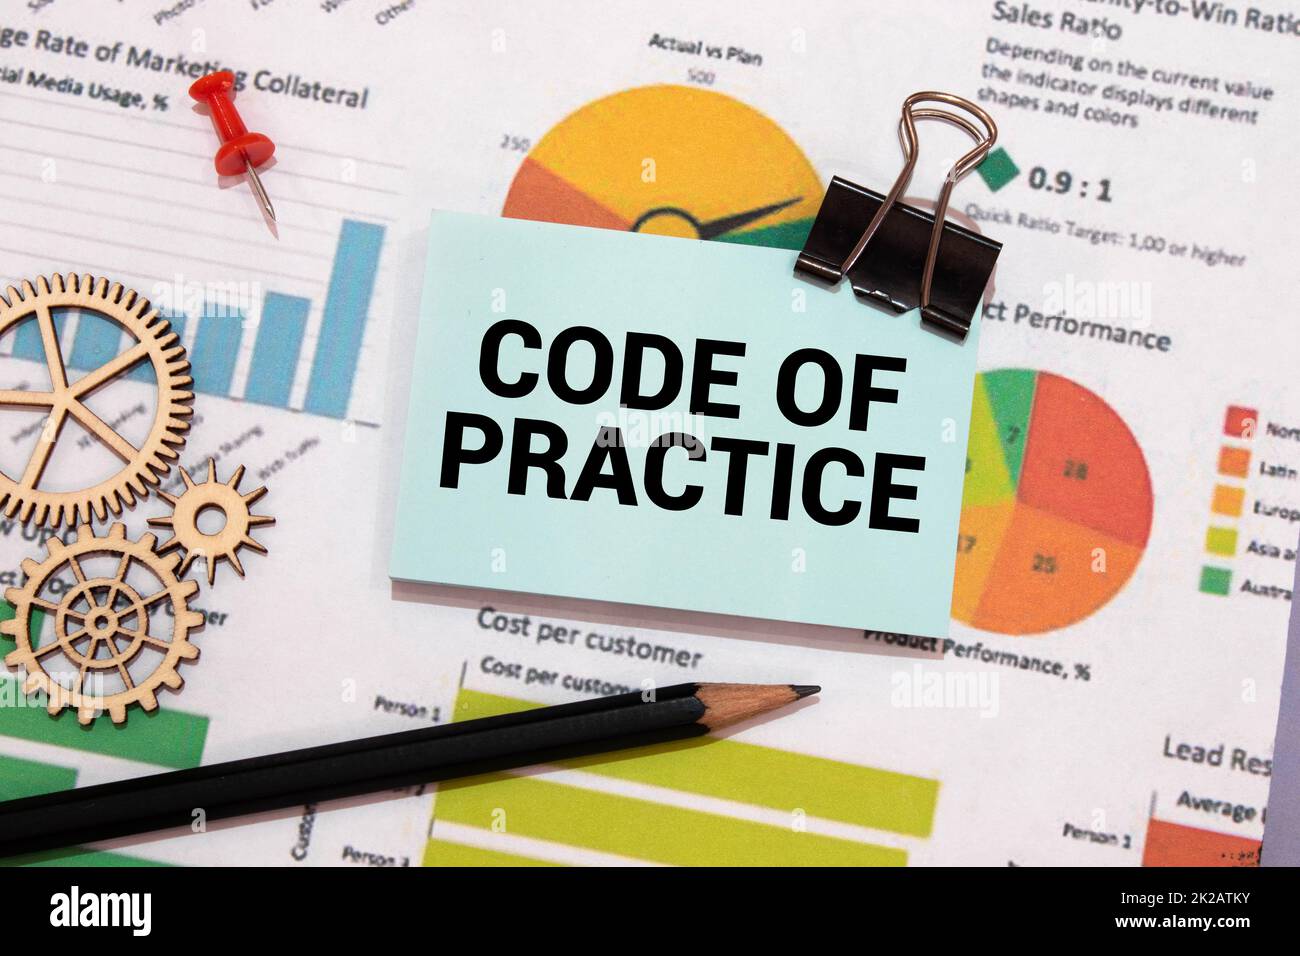 CODE OF PRACTICE text on the paper sheet with chart,color paper and calculator. Stock Photo